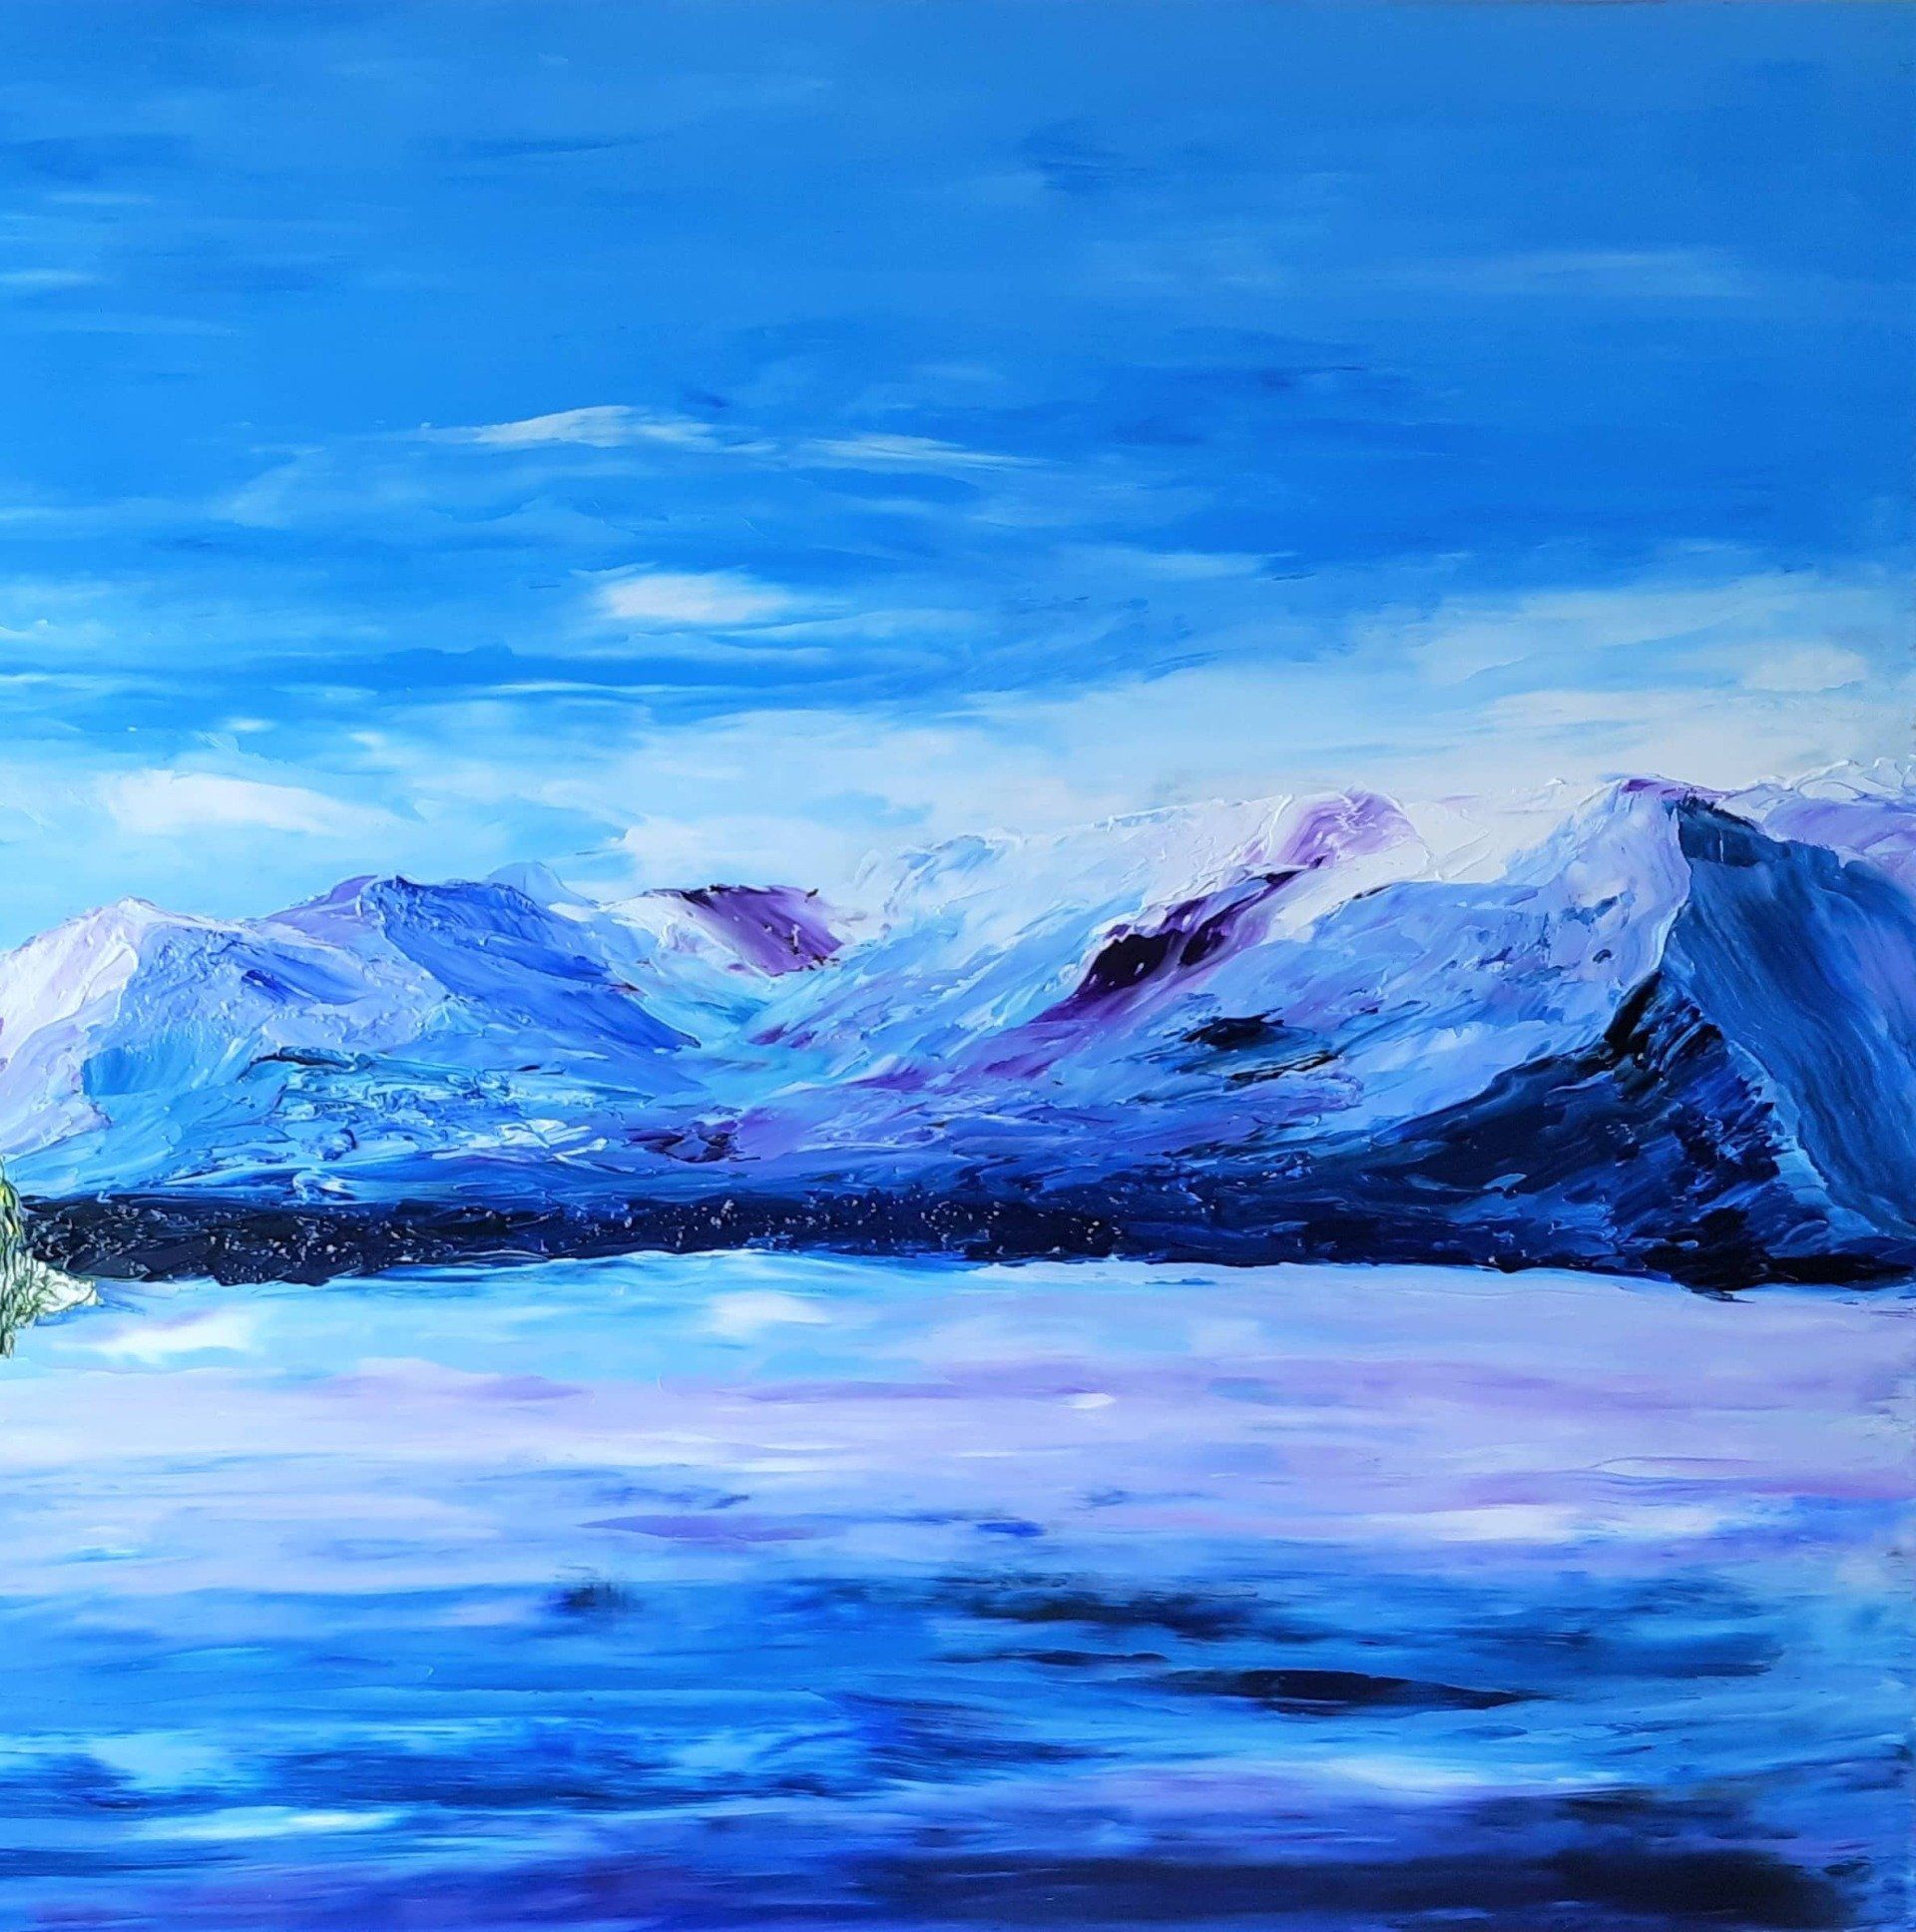 Summer Sky Oil on Masonite 16 in. x 15 in.  The title is deceptive as the mountain in the painting takes up the middle third. The summer sky is a clear blue with a hint of cloud blending into the mountain peaks that highlight the snowy tops. The purple slopes with the bluish tones give way to a lake that reflects the sky and the mountain. The shoreline is a combination of opaque blue and purple.